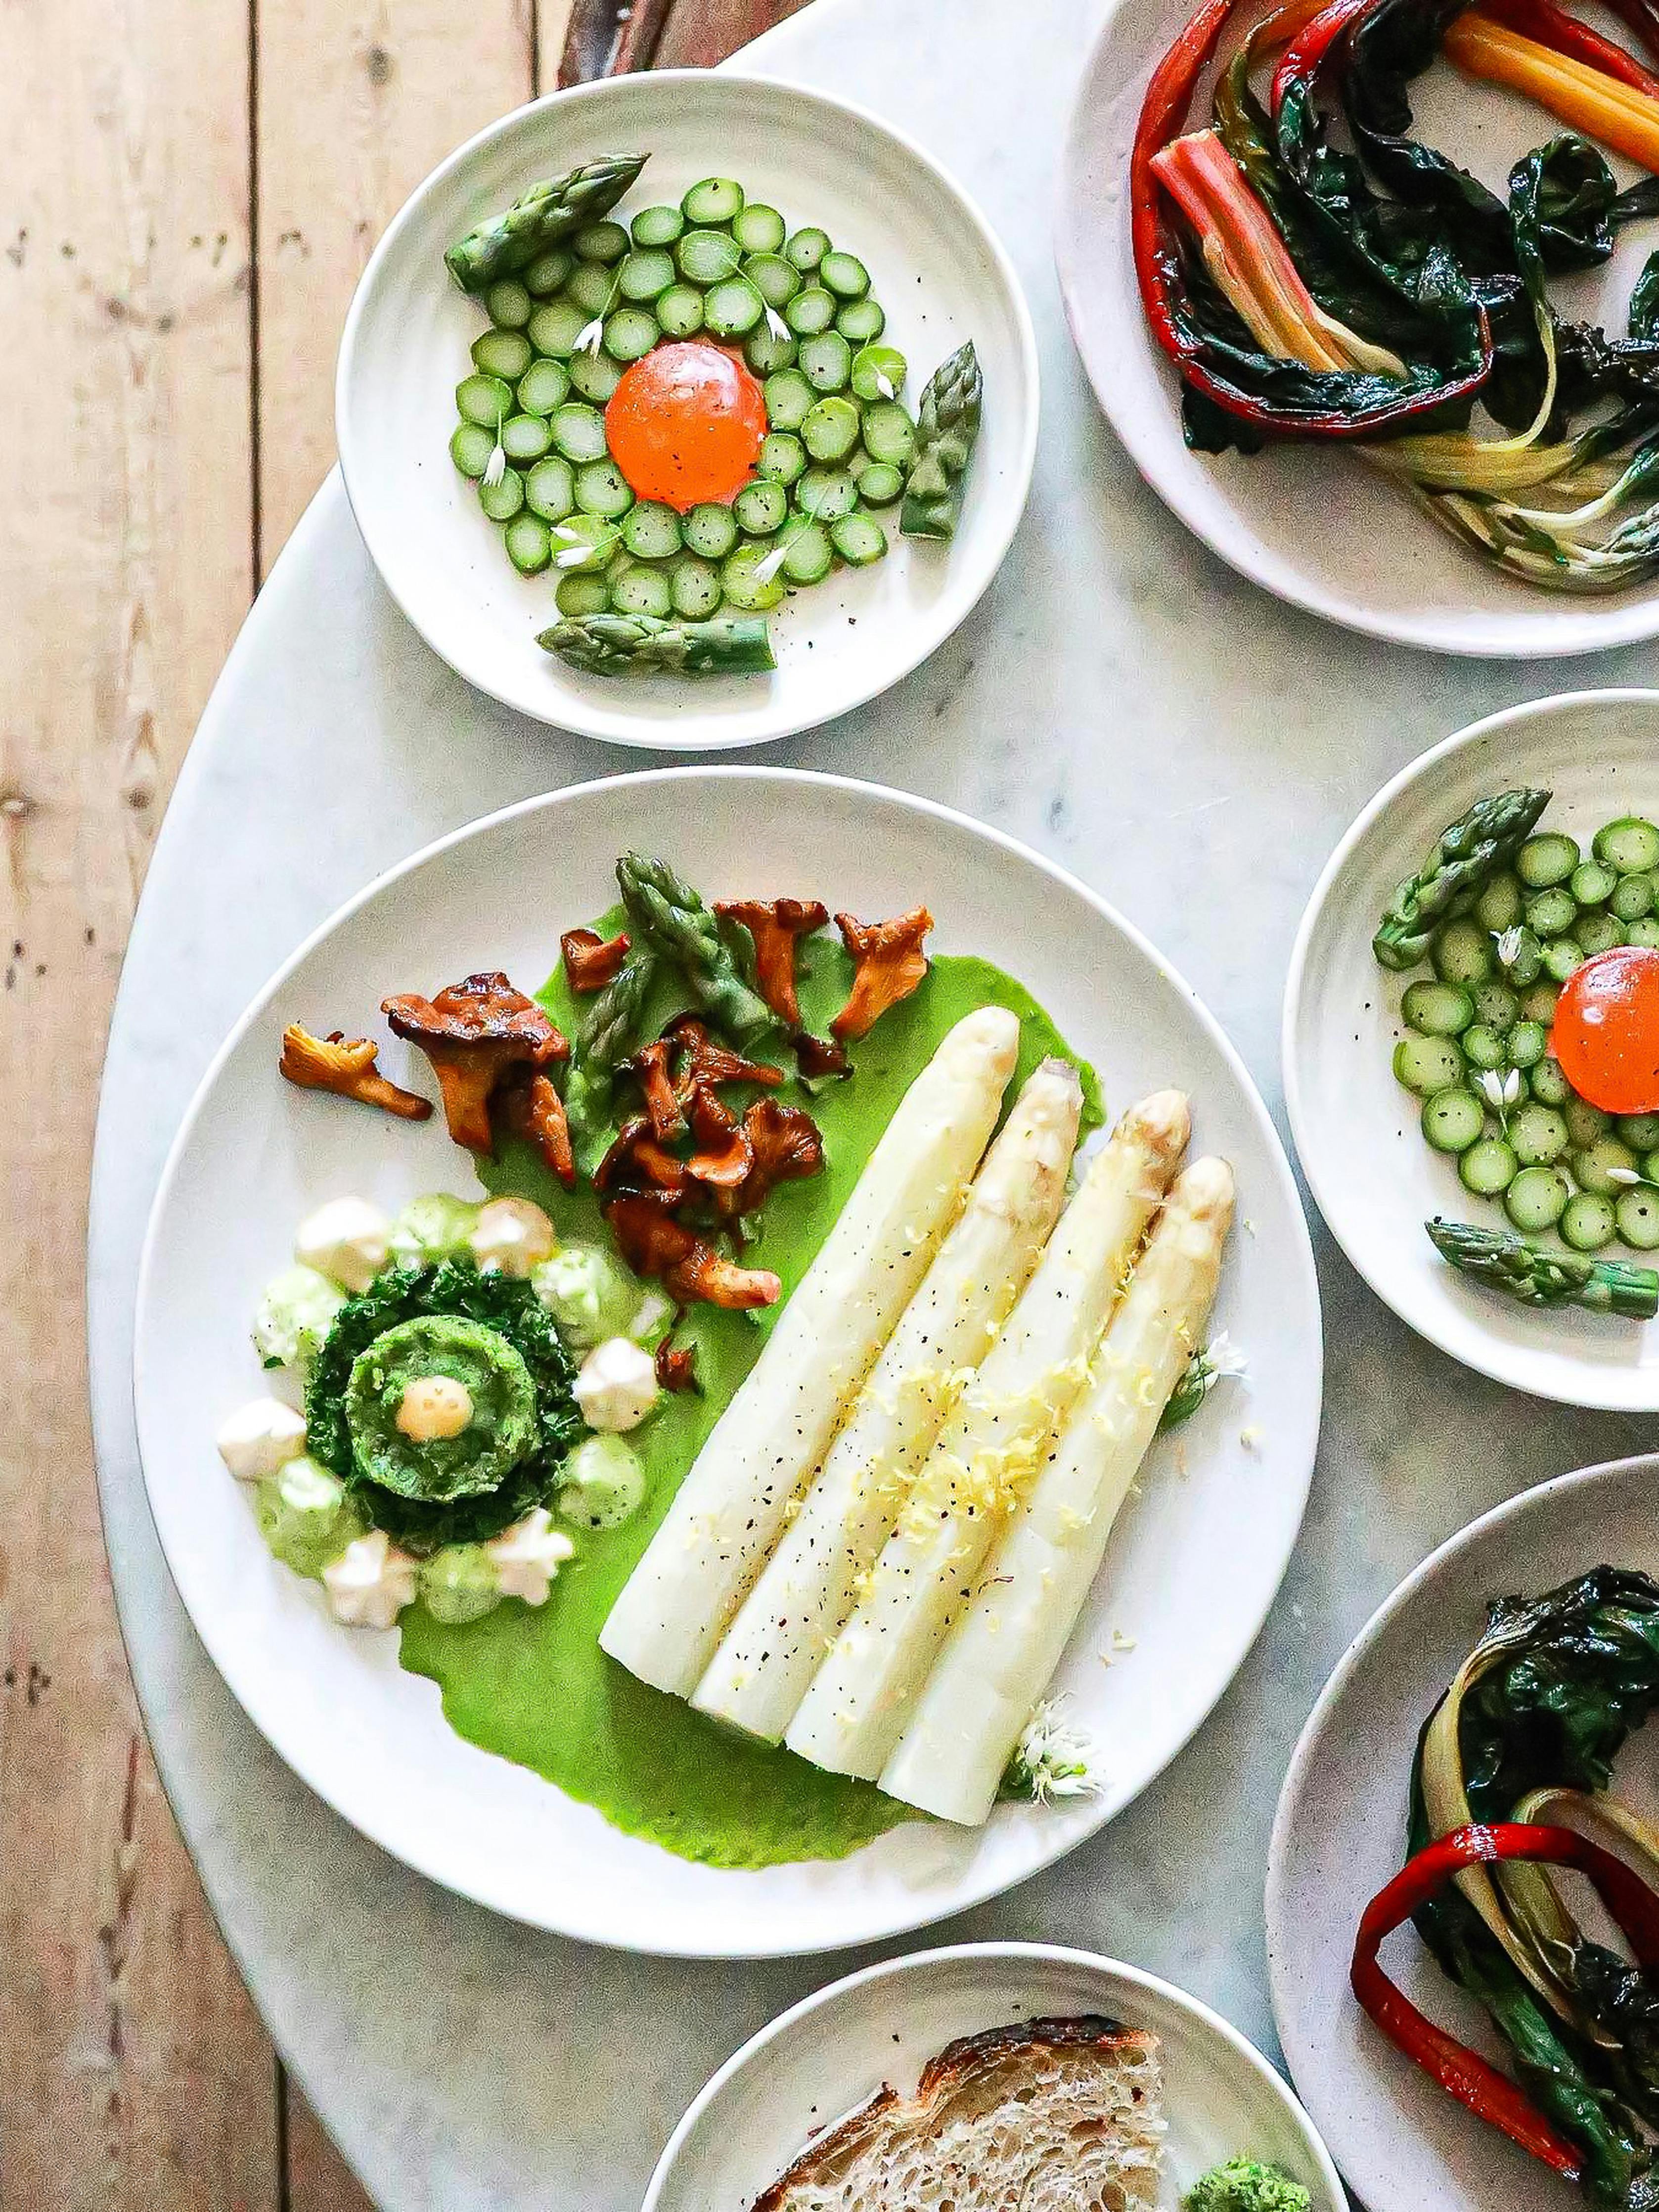 white asparagus with sauce near vegetarian dishes with herbs